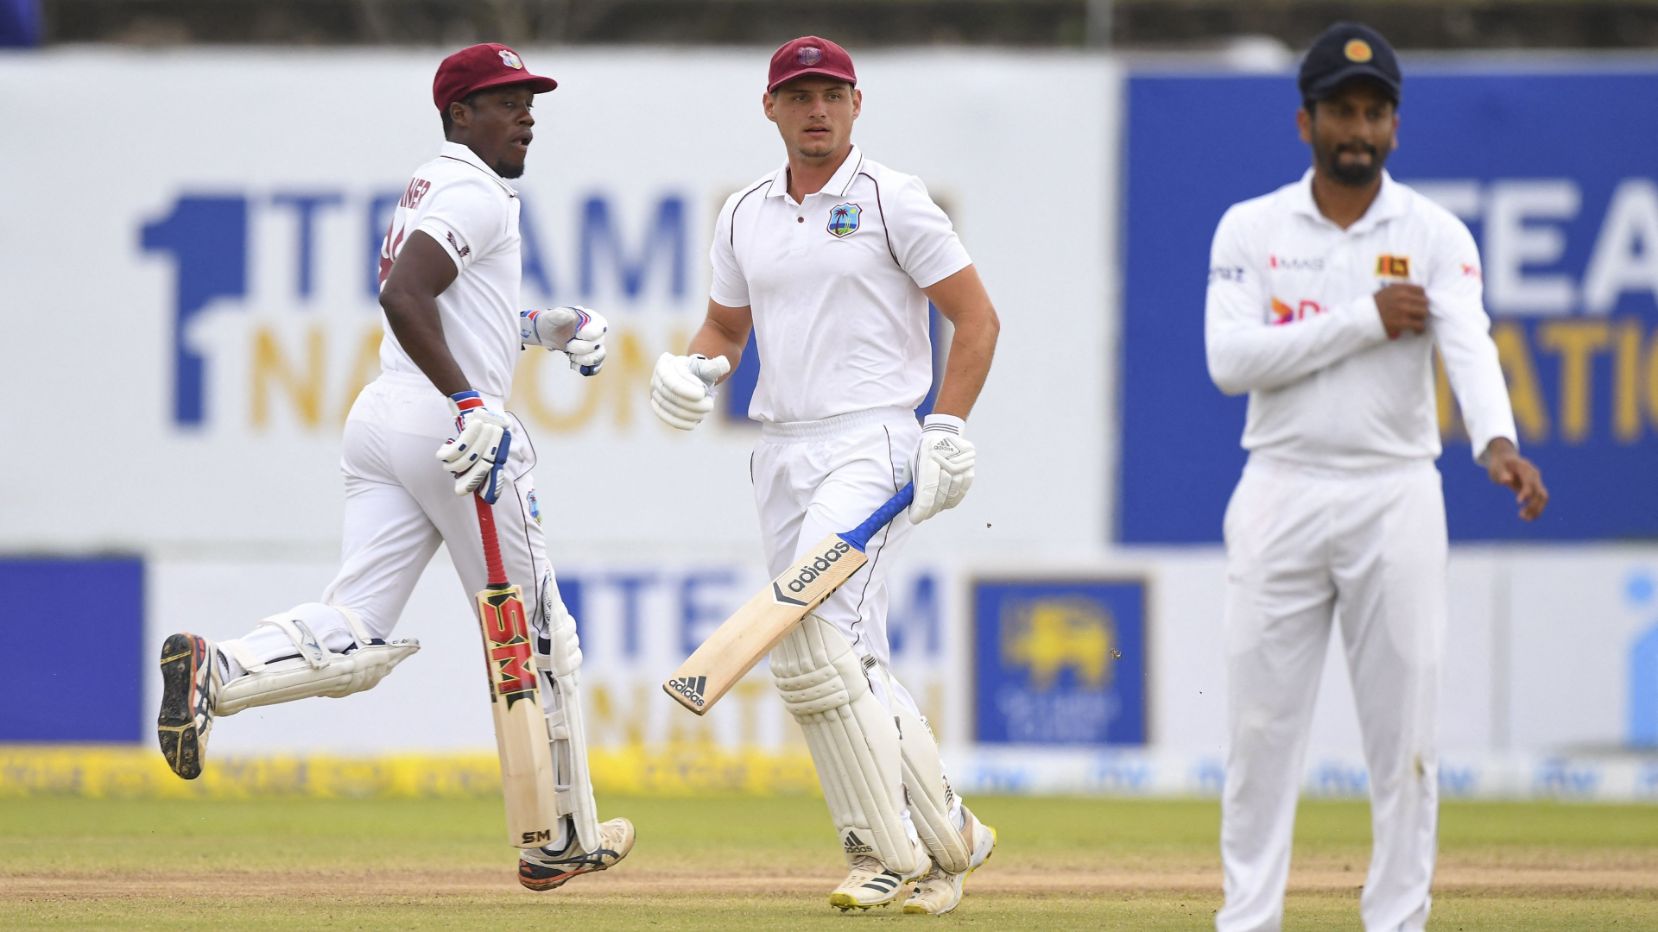 SL vs WI | 1st Test: Fifties from Da Silva, Bonner, overcast conditions keep Windies in the game